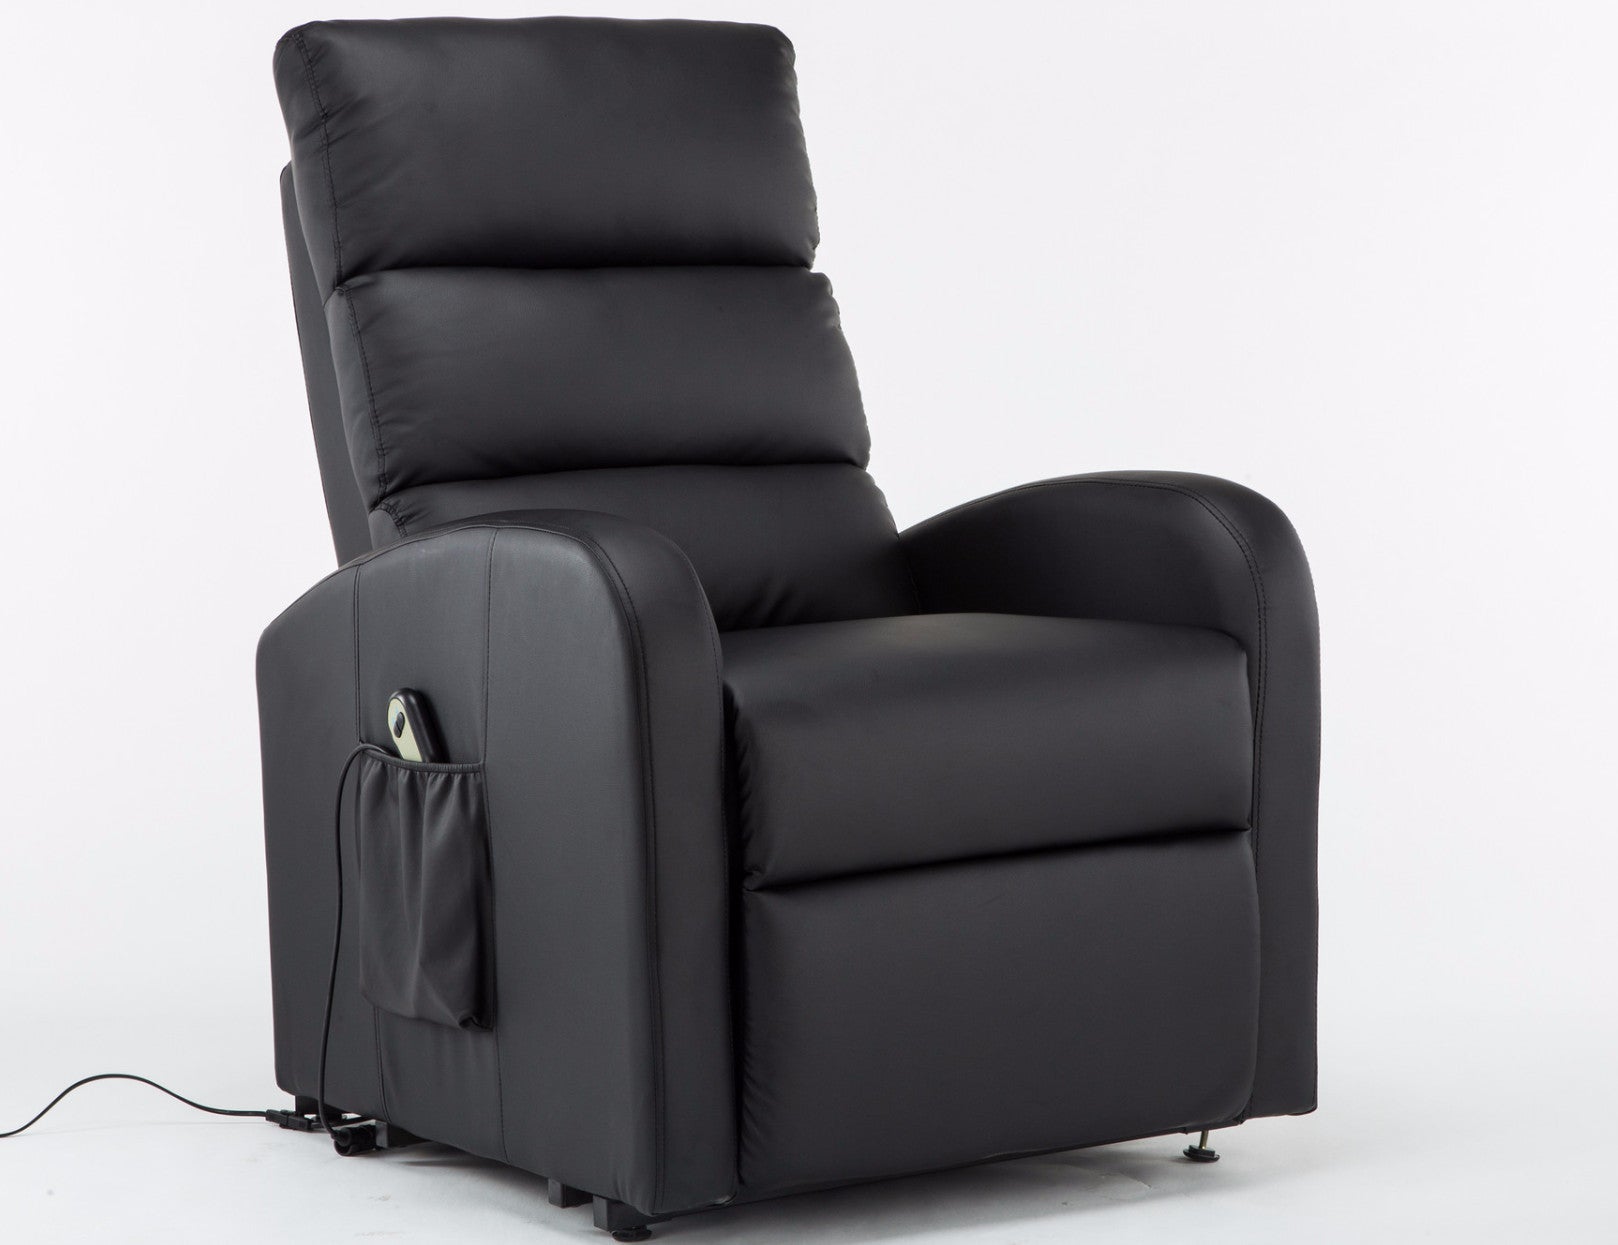 Lift Classic Power Lift Bonded Leather Recliner